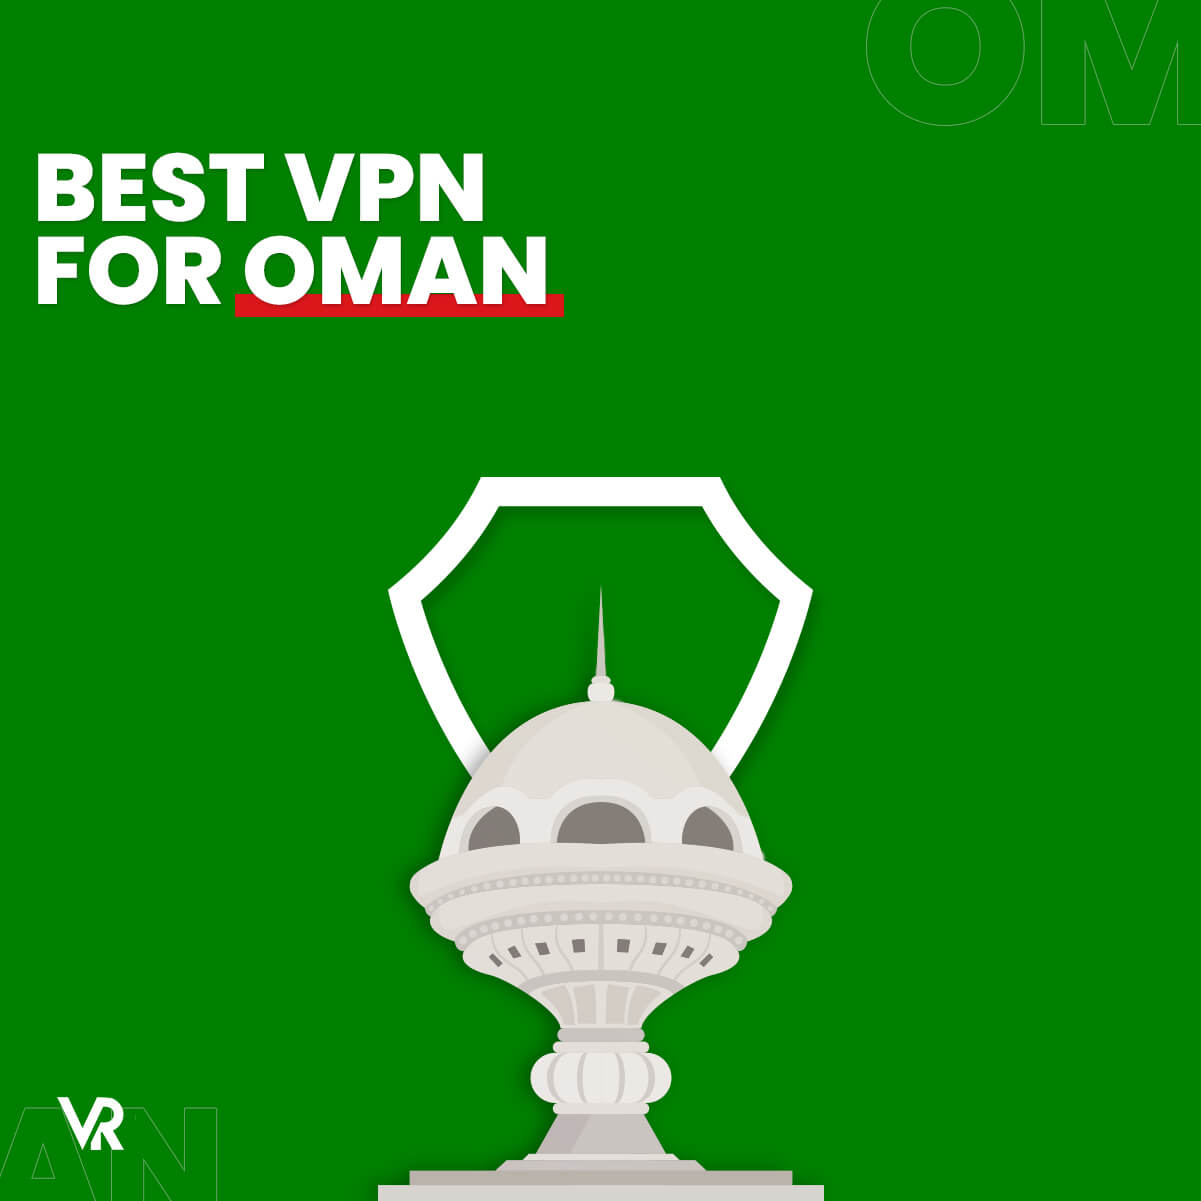 Best-vpn-For-oman-Featured(1)